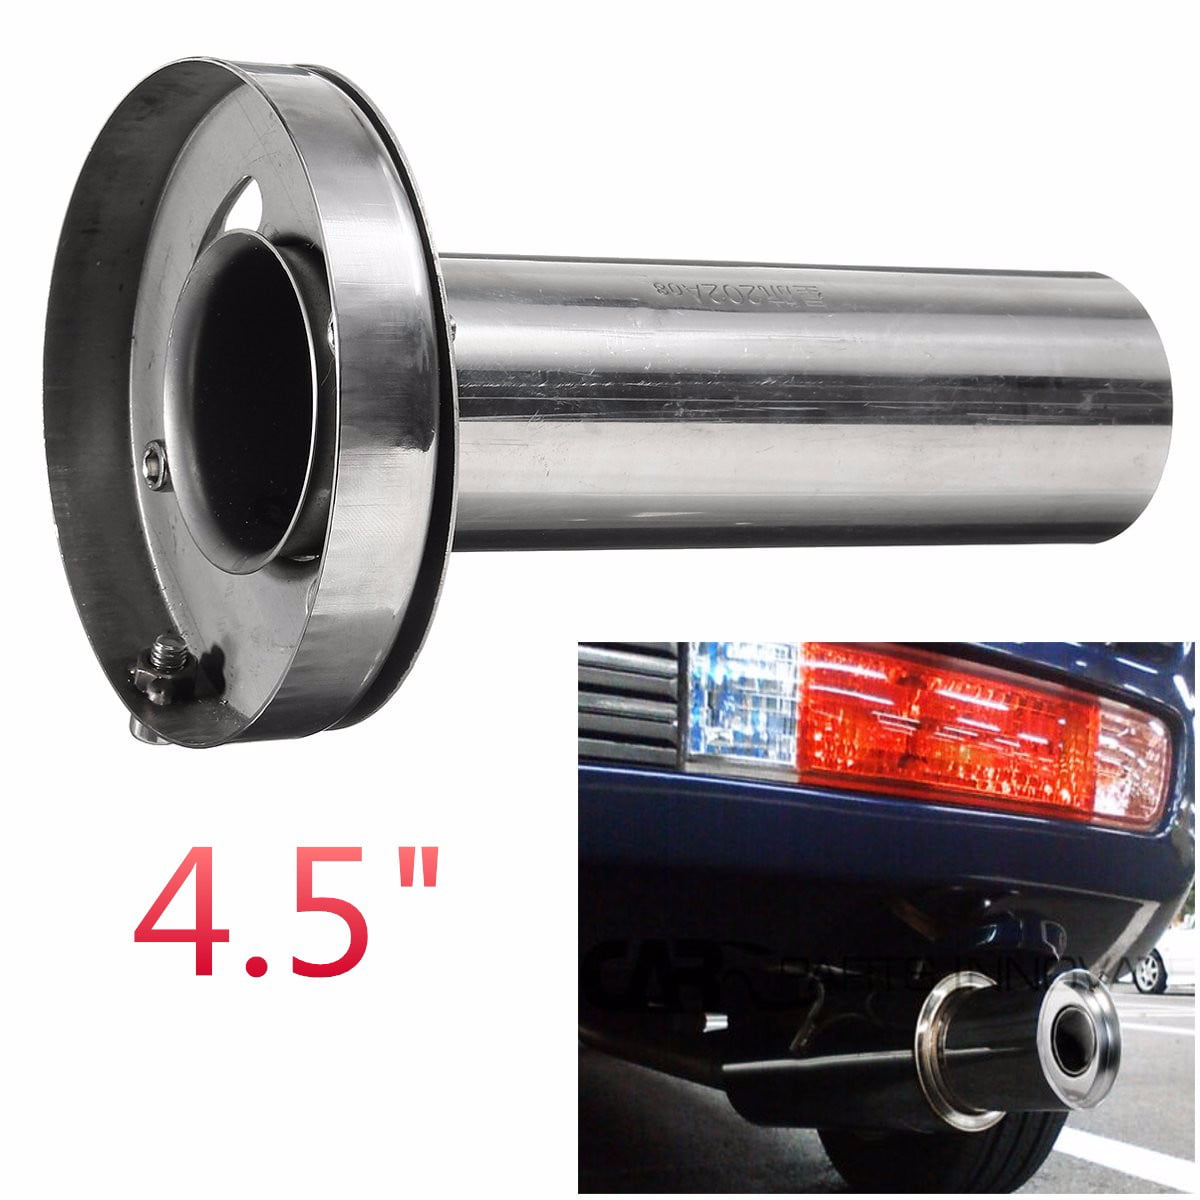 3.5 inches Car Modification Accessories Universal Stainless Steel Removable Muffler Silencer for Muffler Car Muffler Car Exhaust Muffler Universal Silencer Removable Silencer Muffler